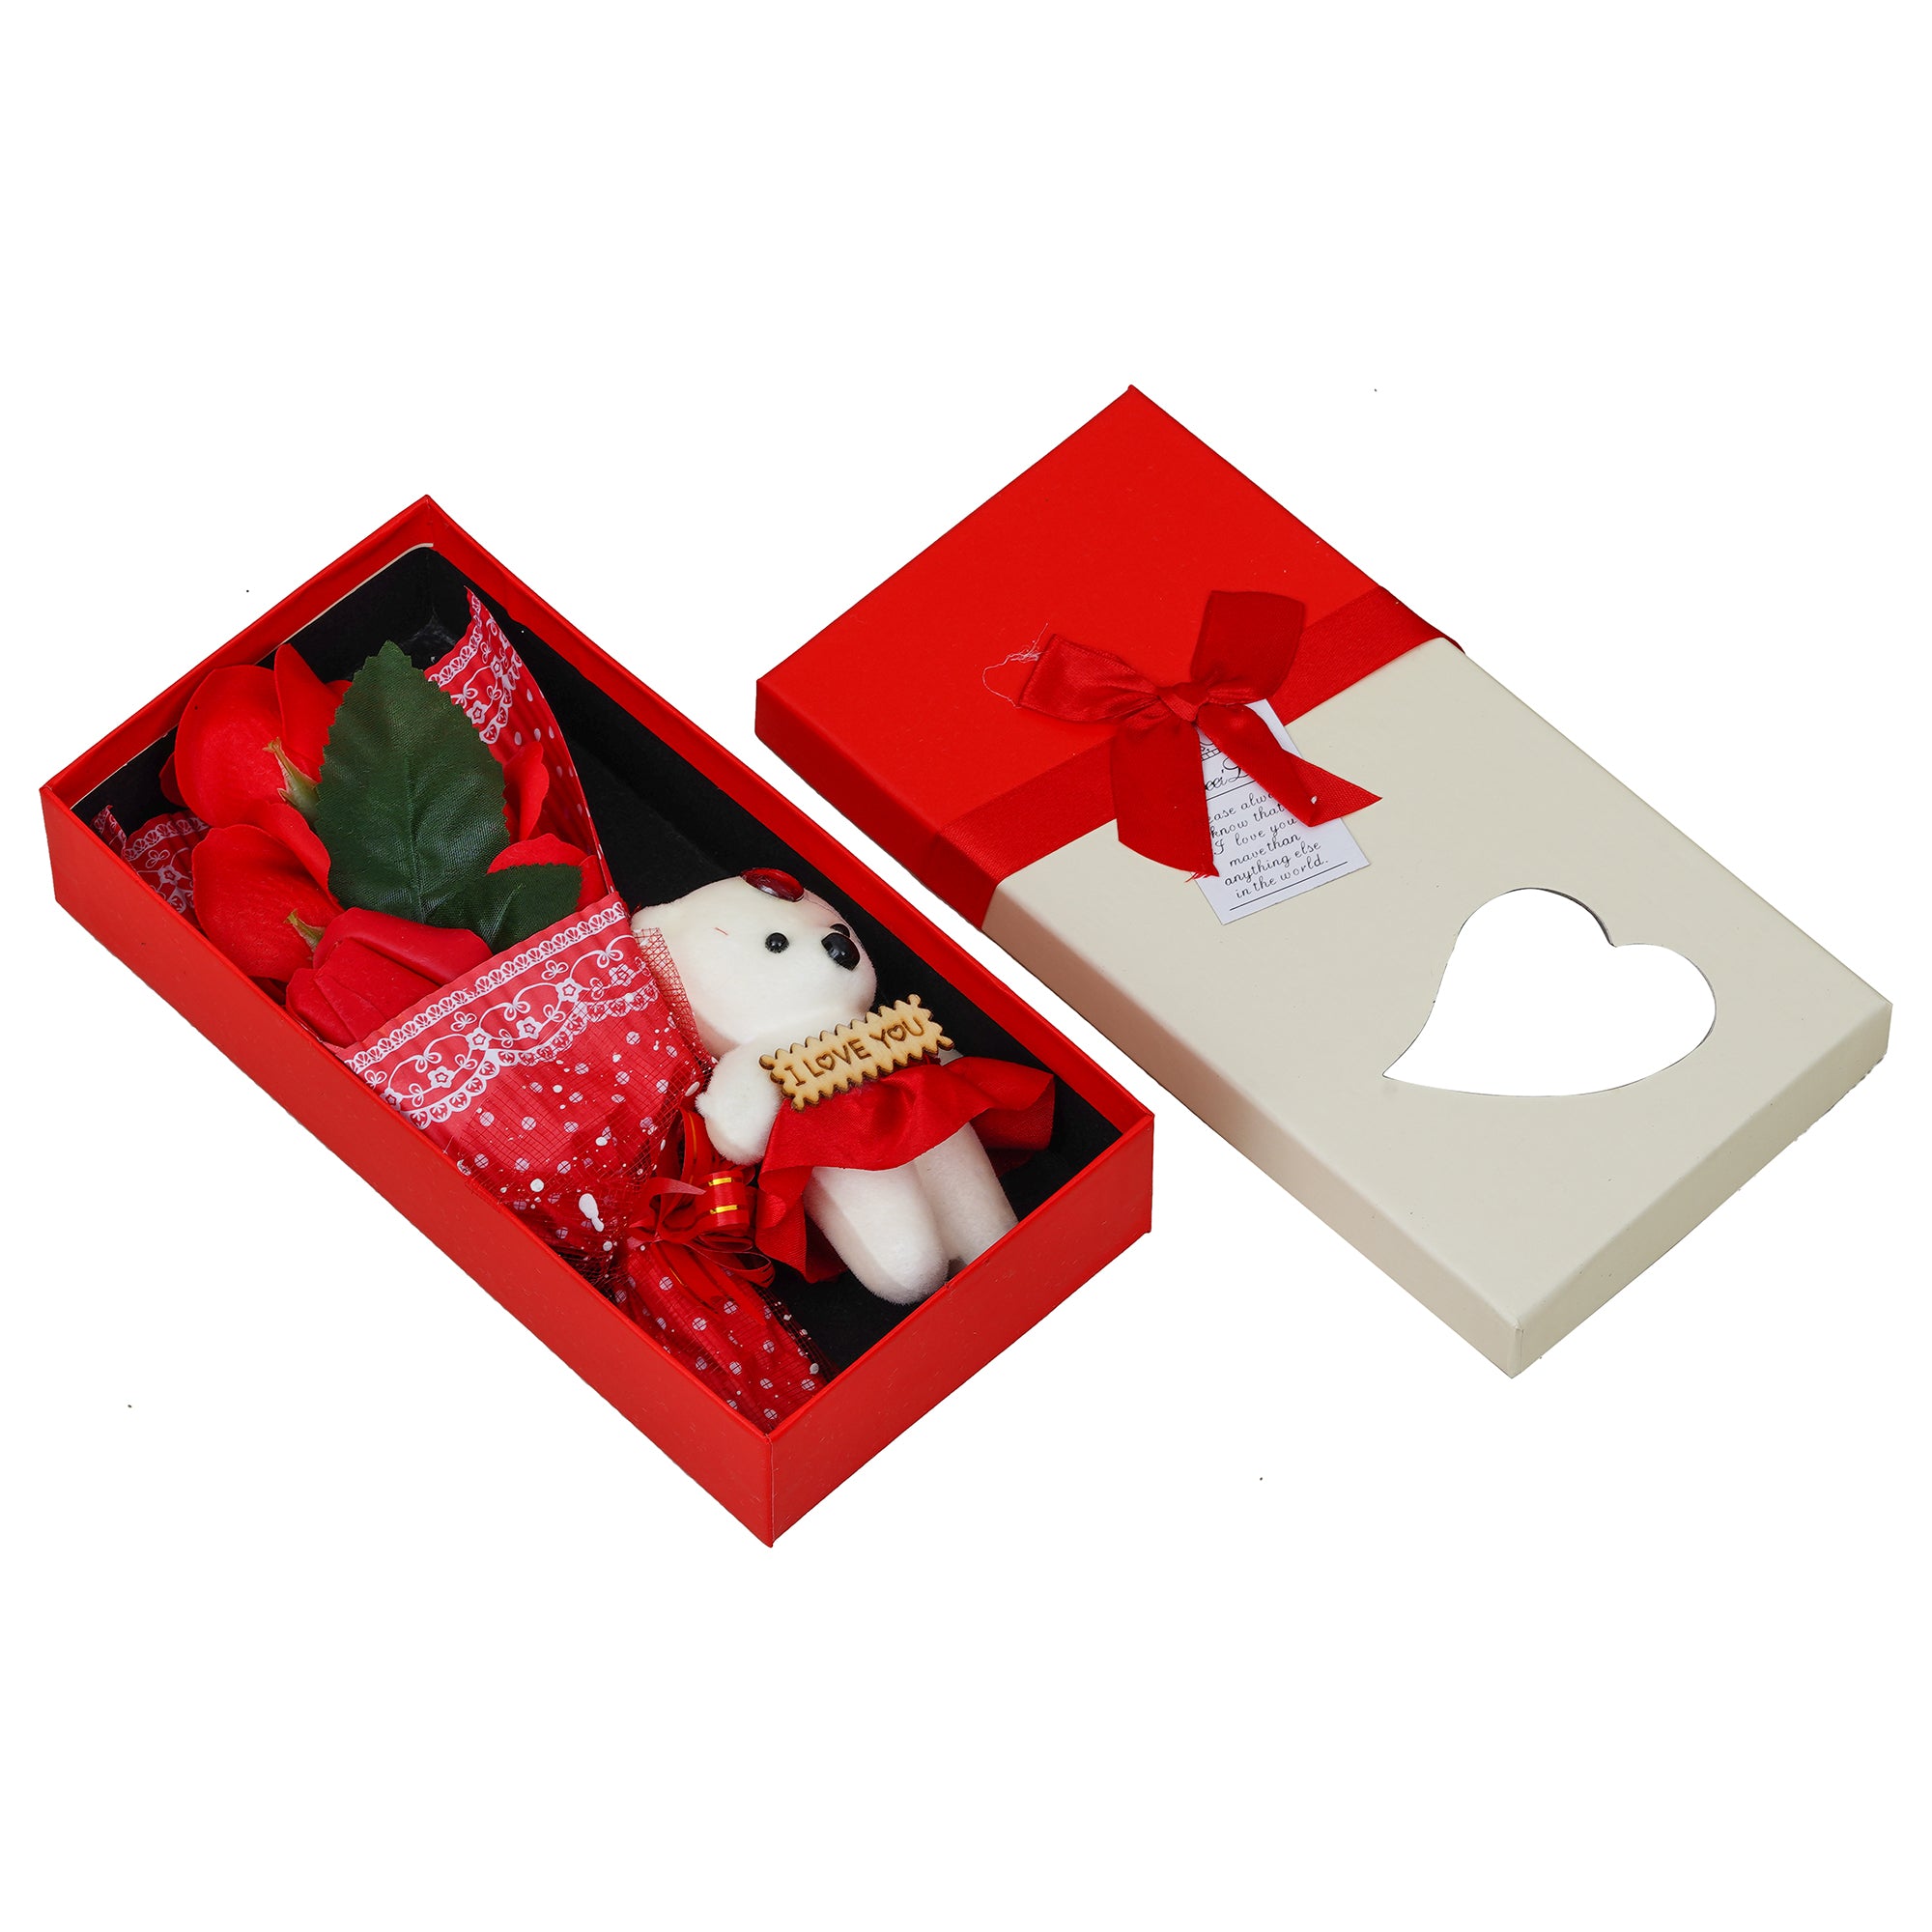 Red Roses Bouquet and White & Red Teddy Bear Valentine's Rectangle Shaped Gift Box 2